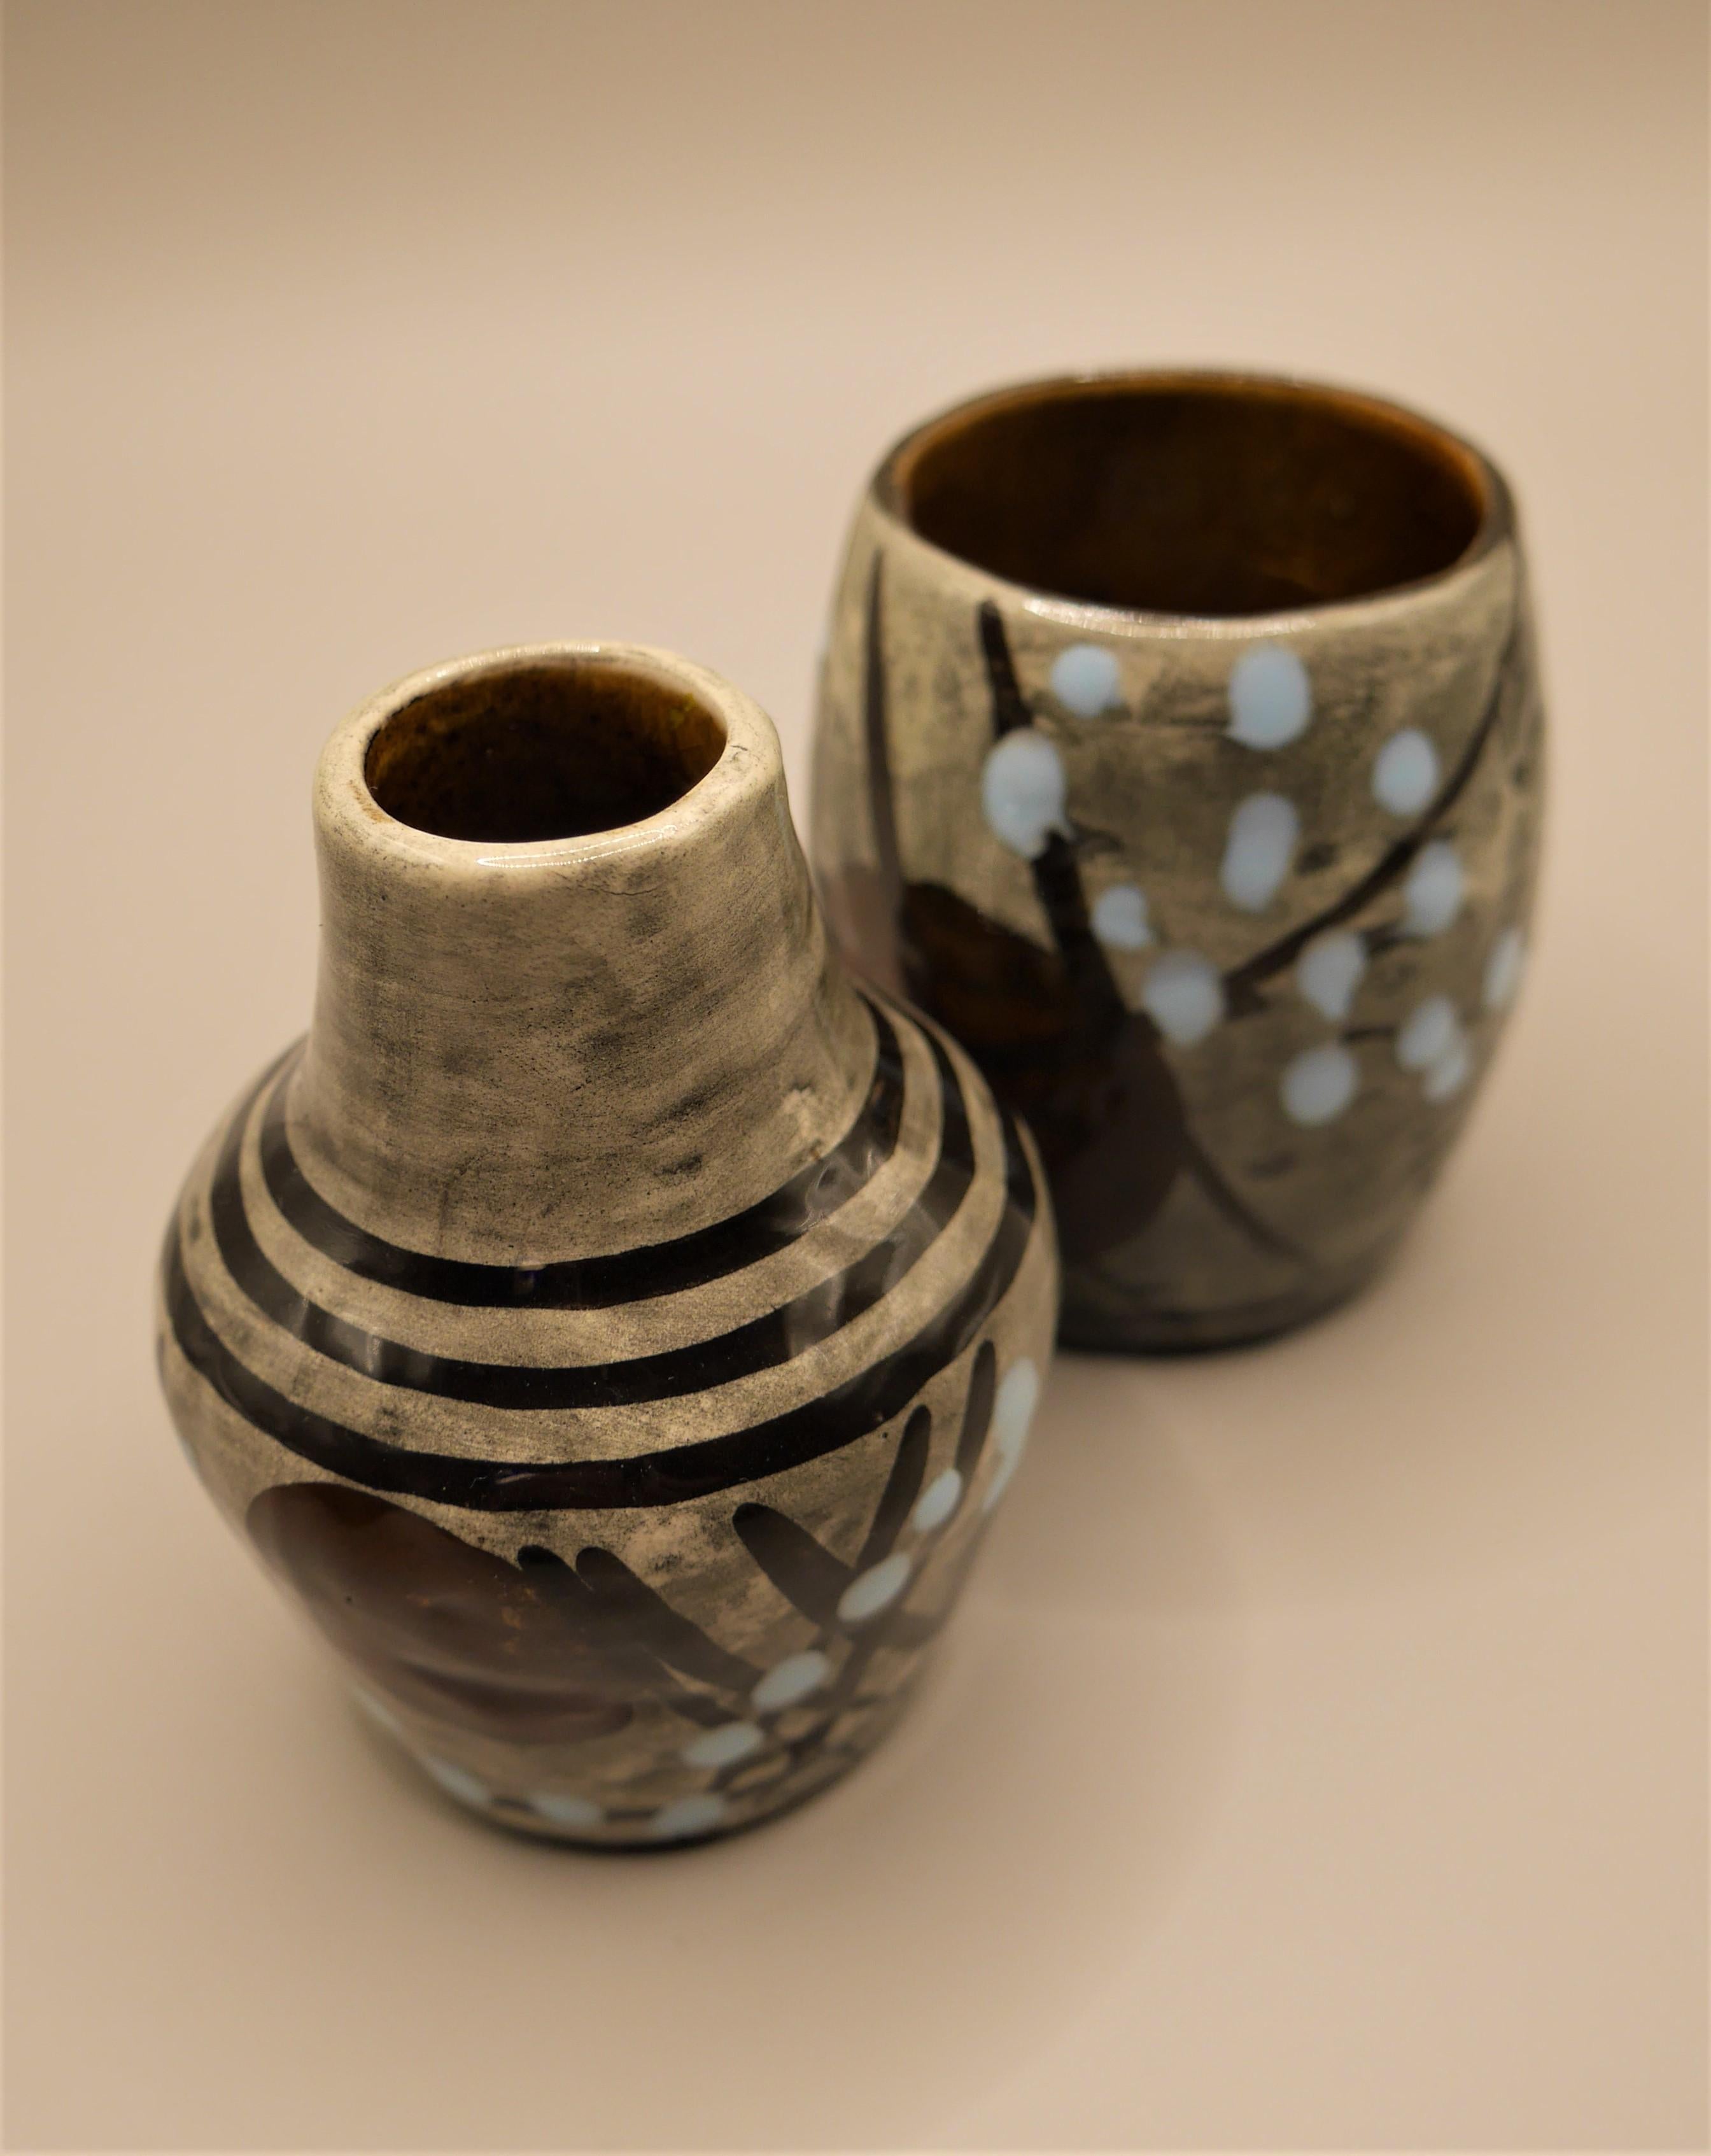 Two adorable small vases from Syco Keramik, Sweden. With a Japanese influenced pattern and glaze of abstract lines and dots in pale blue. 

Syco Keramik was a Swedish ceramics company, started in November 1945 by Arnold Wiig on Torskholmen in